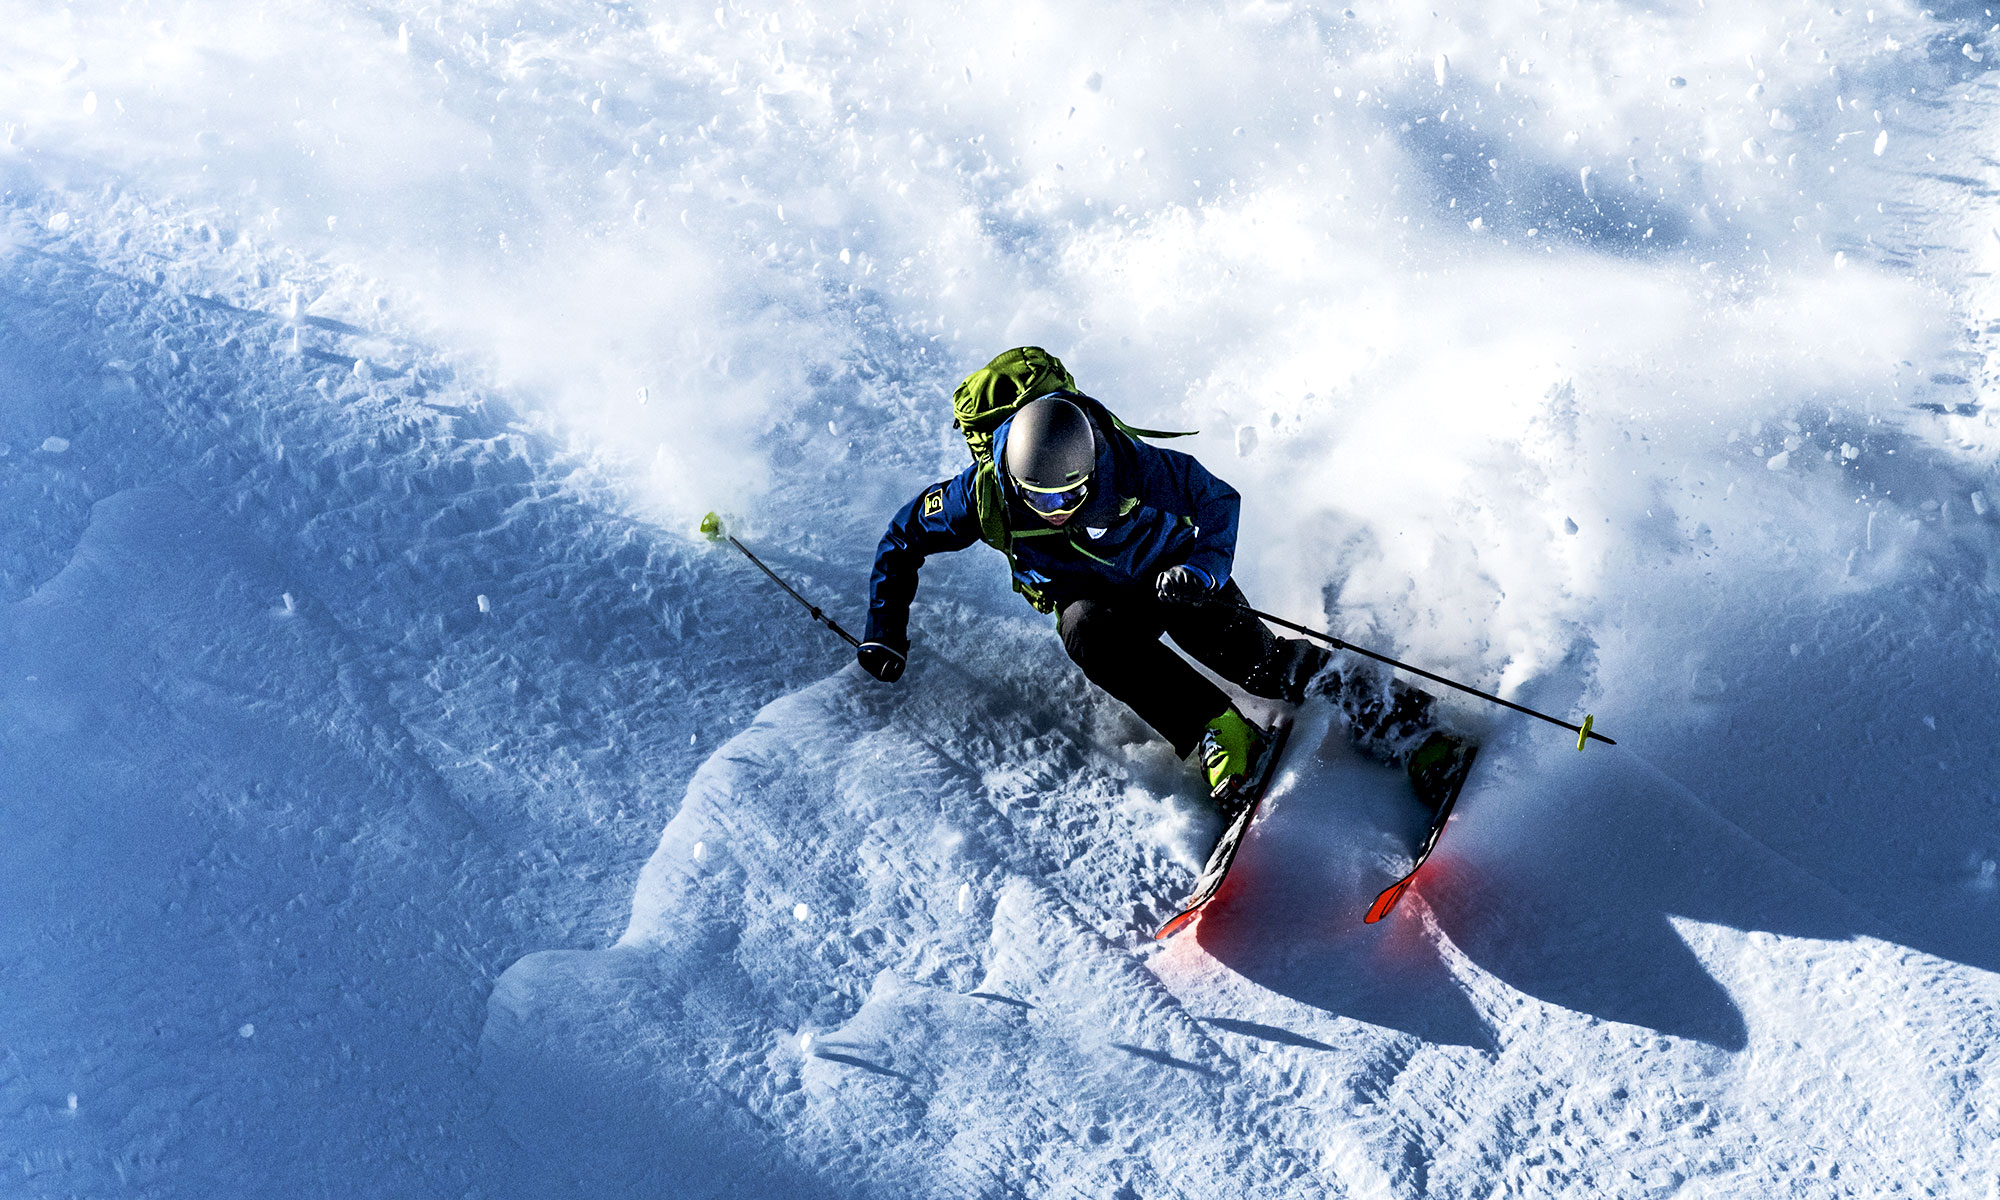 OGASAKA SKI | Only when you ride a ski as you wish, real fun will be born.